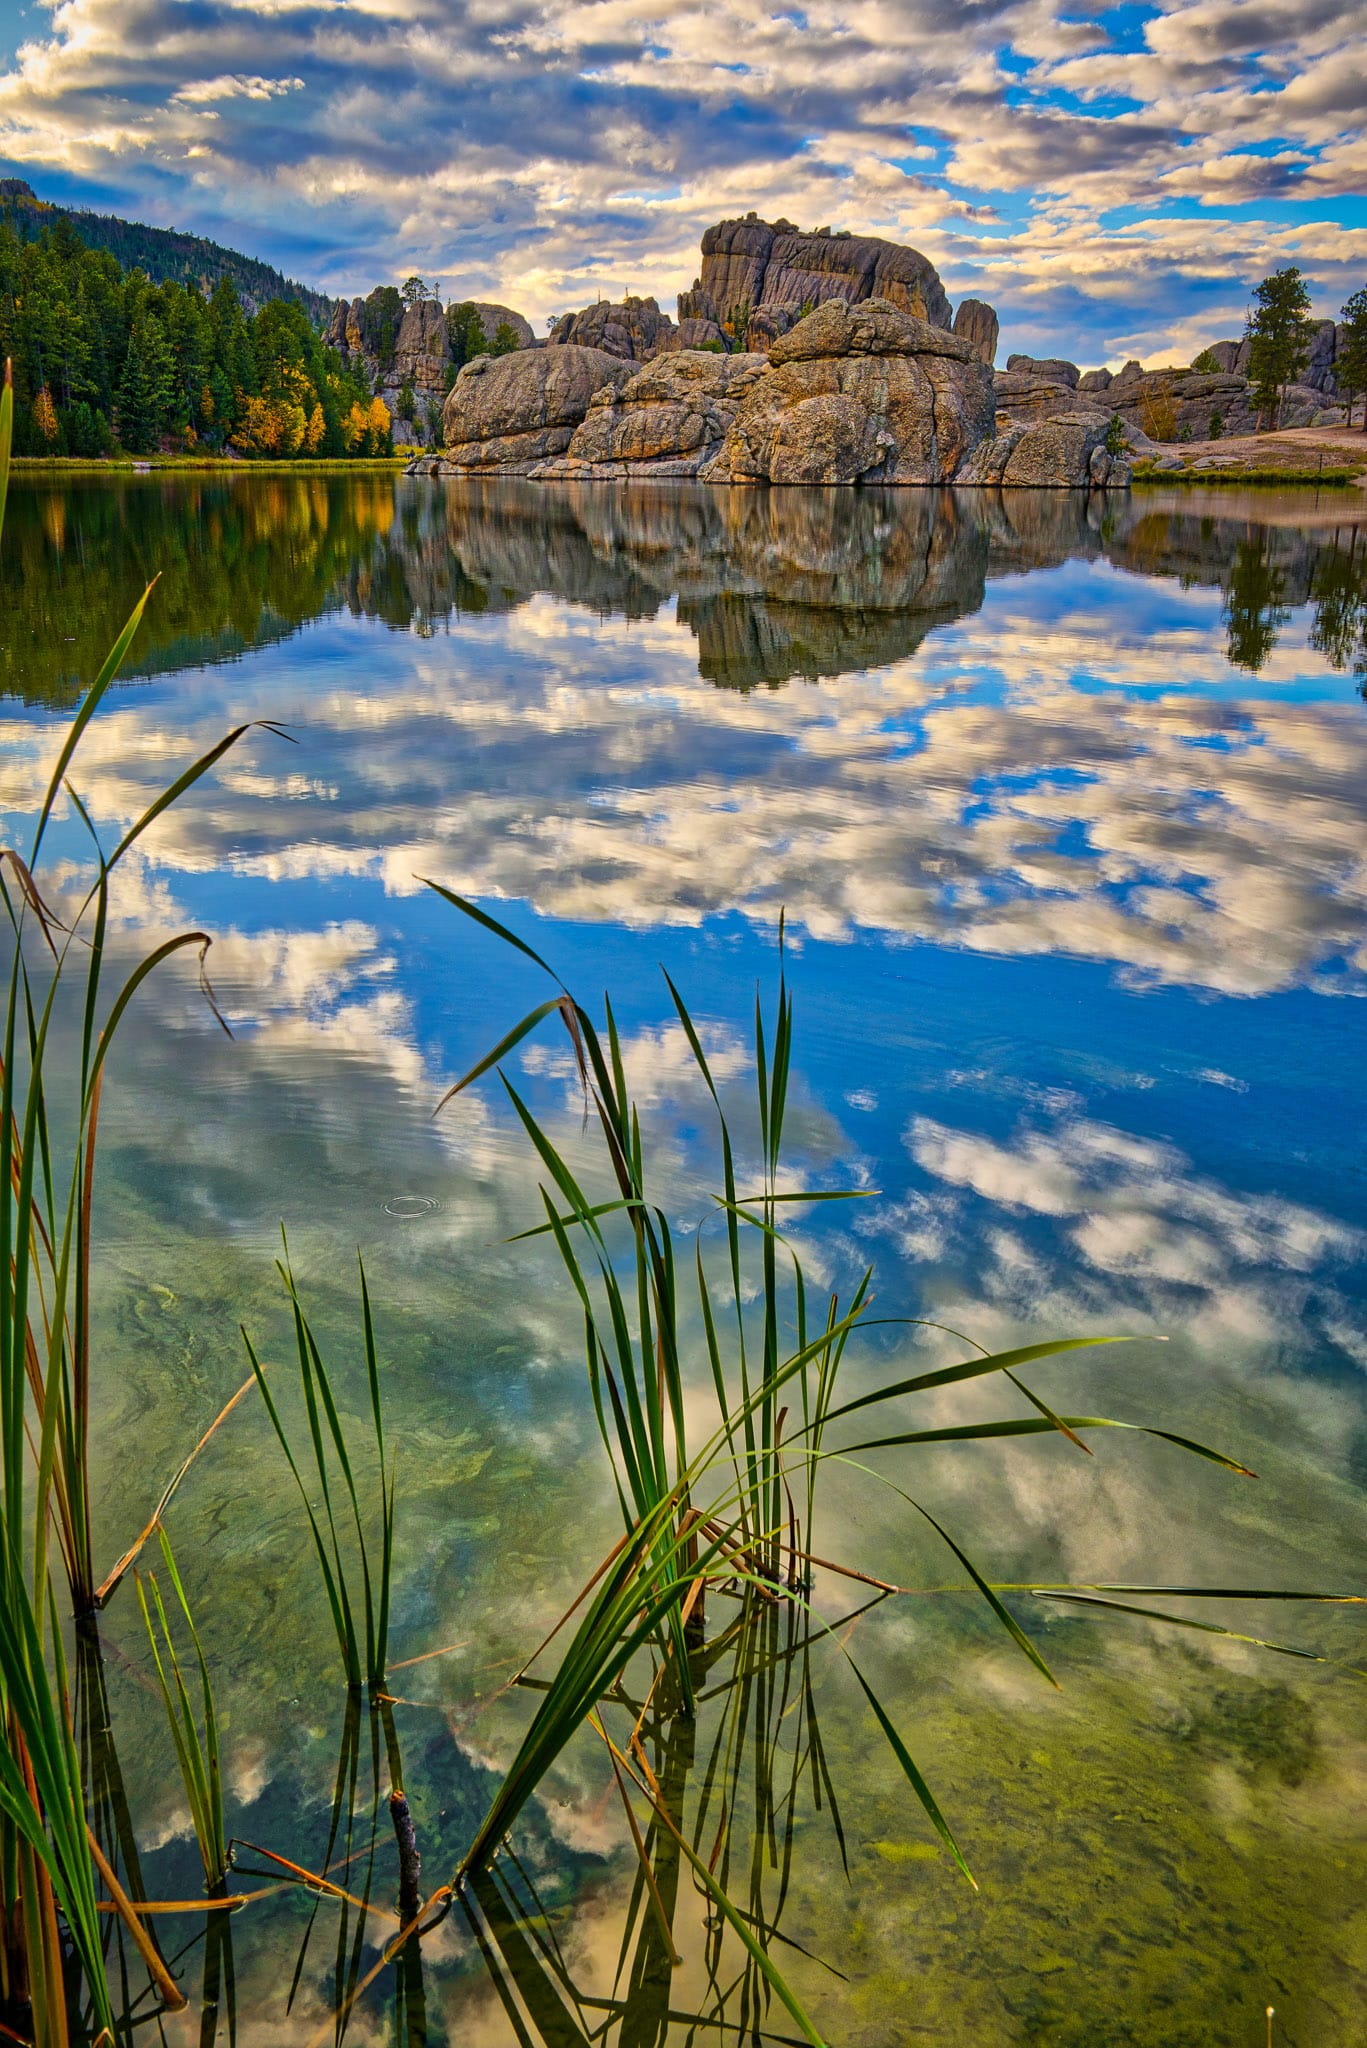 Afternoon clouds are reflected in the still waters of Sylvan Lake in Custer State Park near Custer, South Dakota.